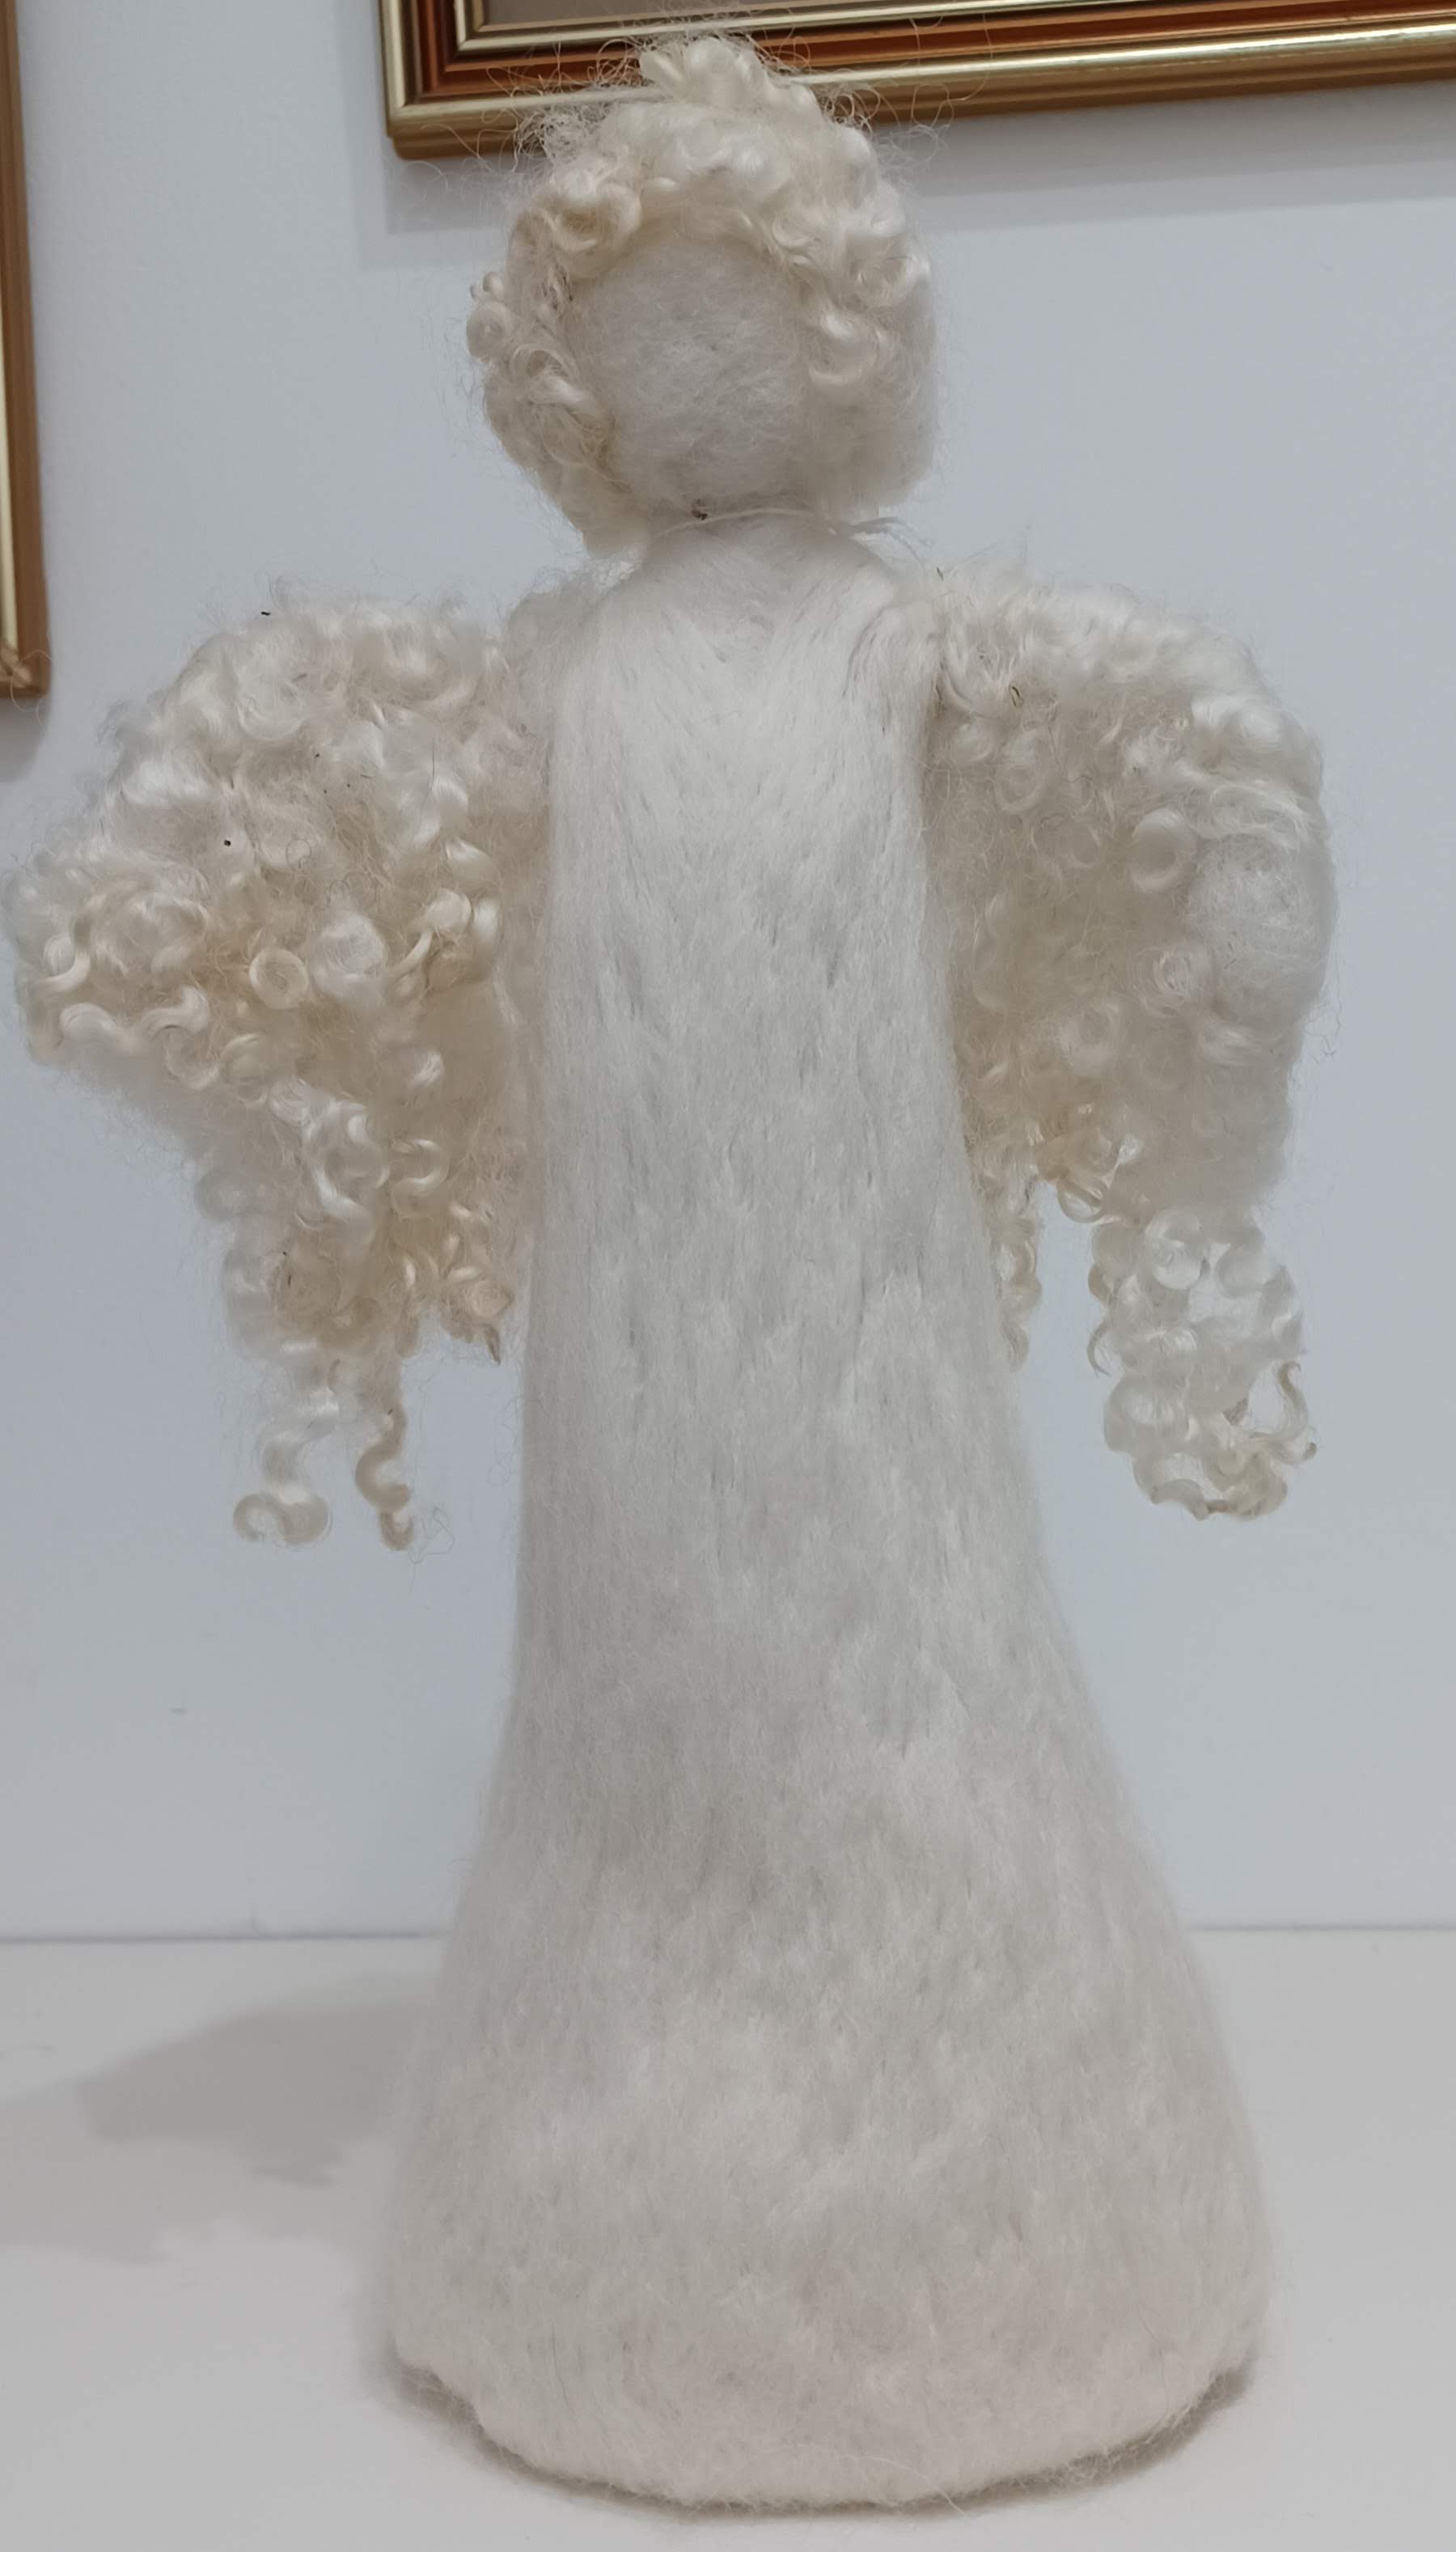 felted angel